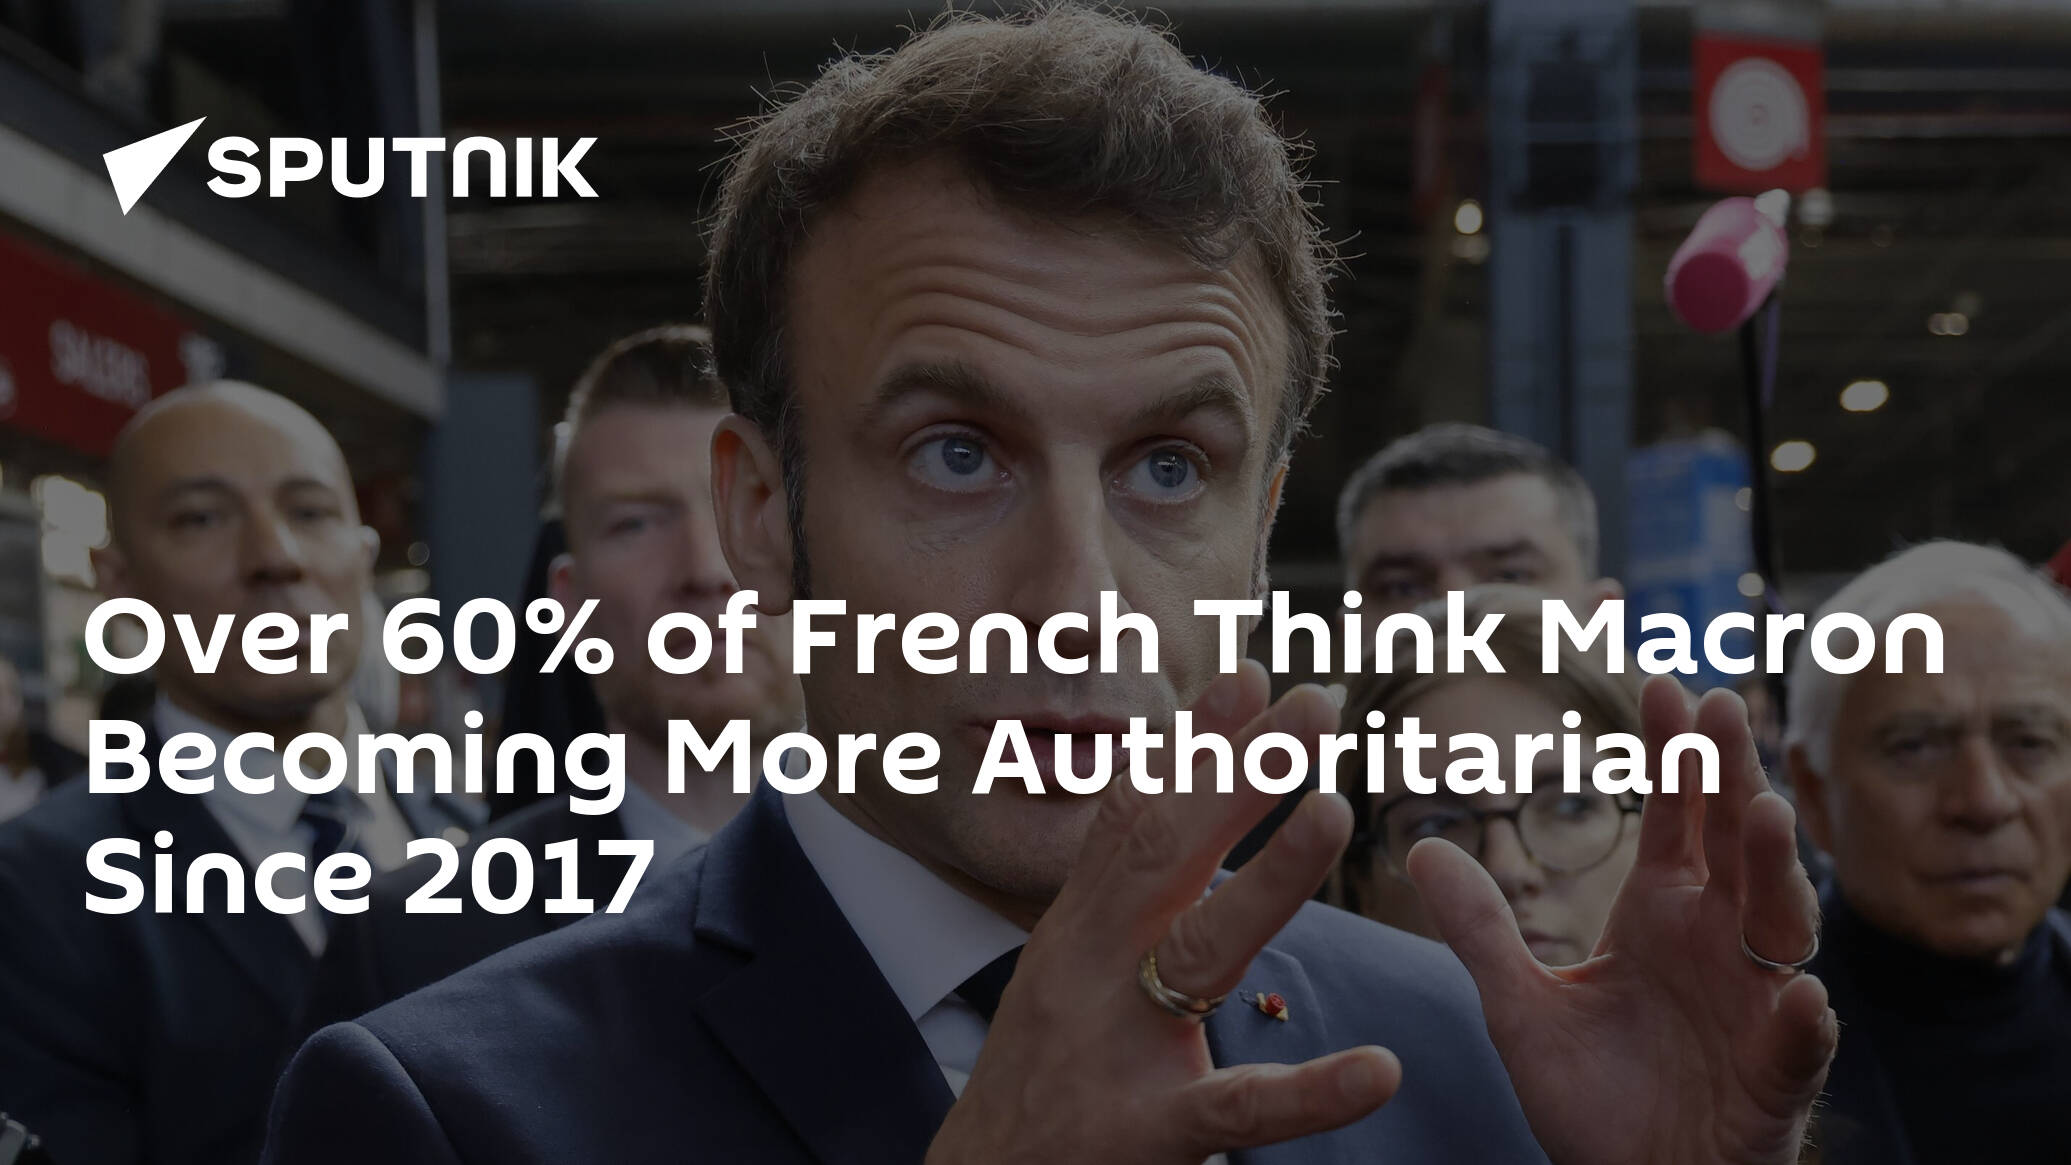 Over 60% of French Think Macron Becoming More Authoritarian Since 2017